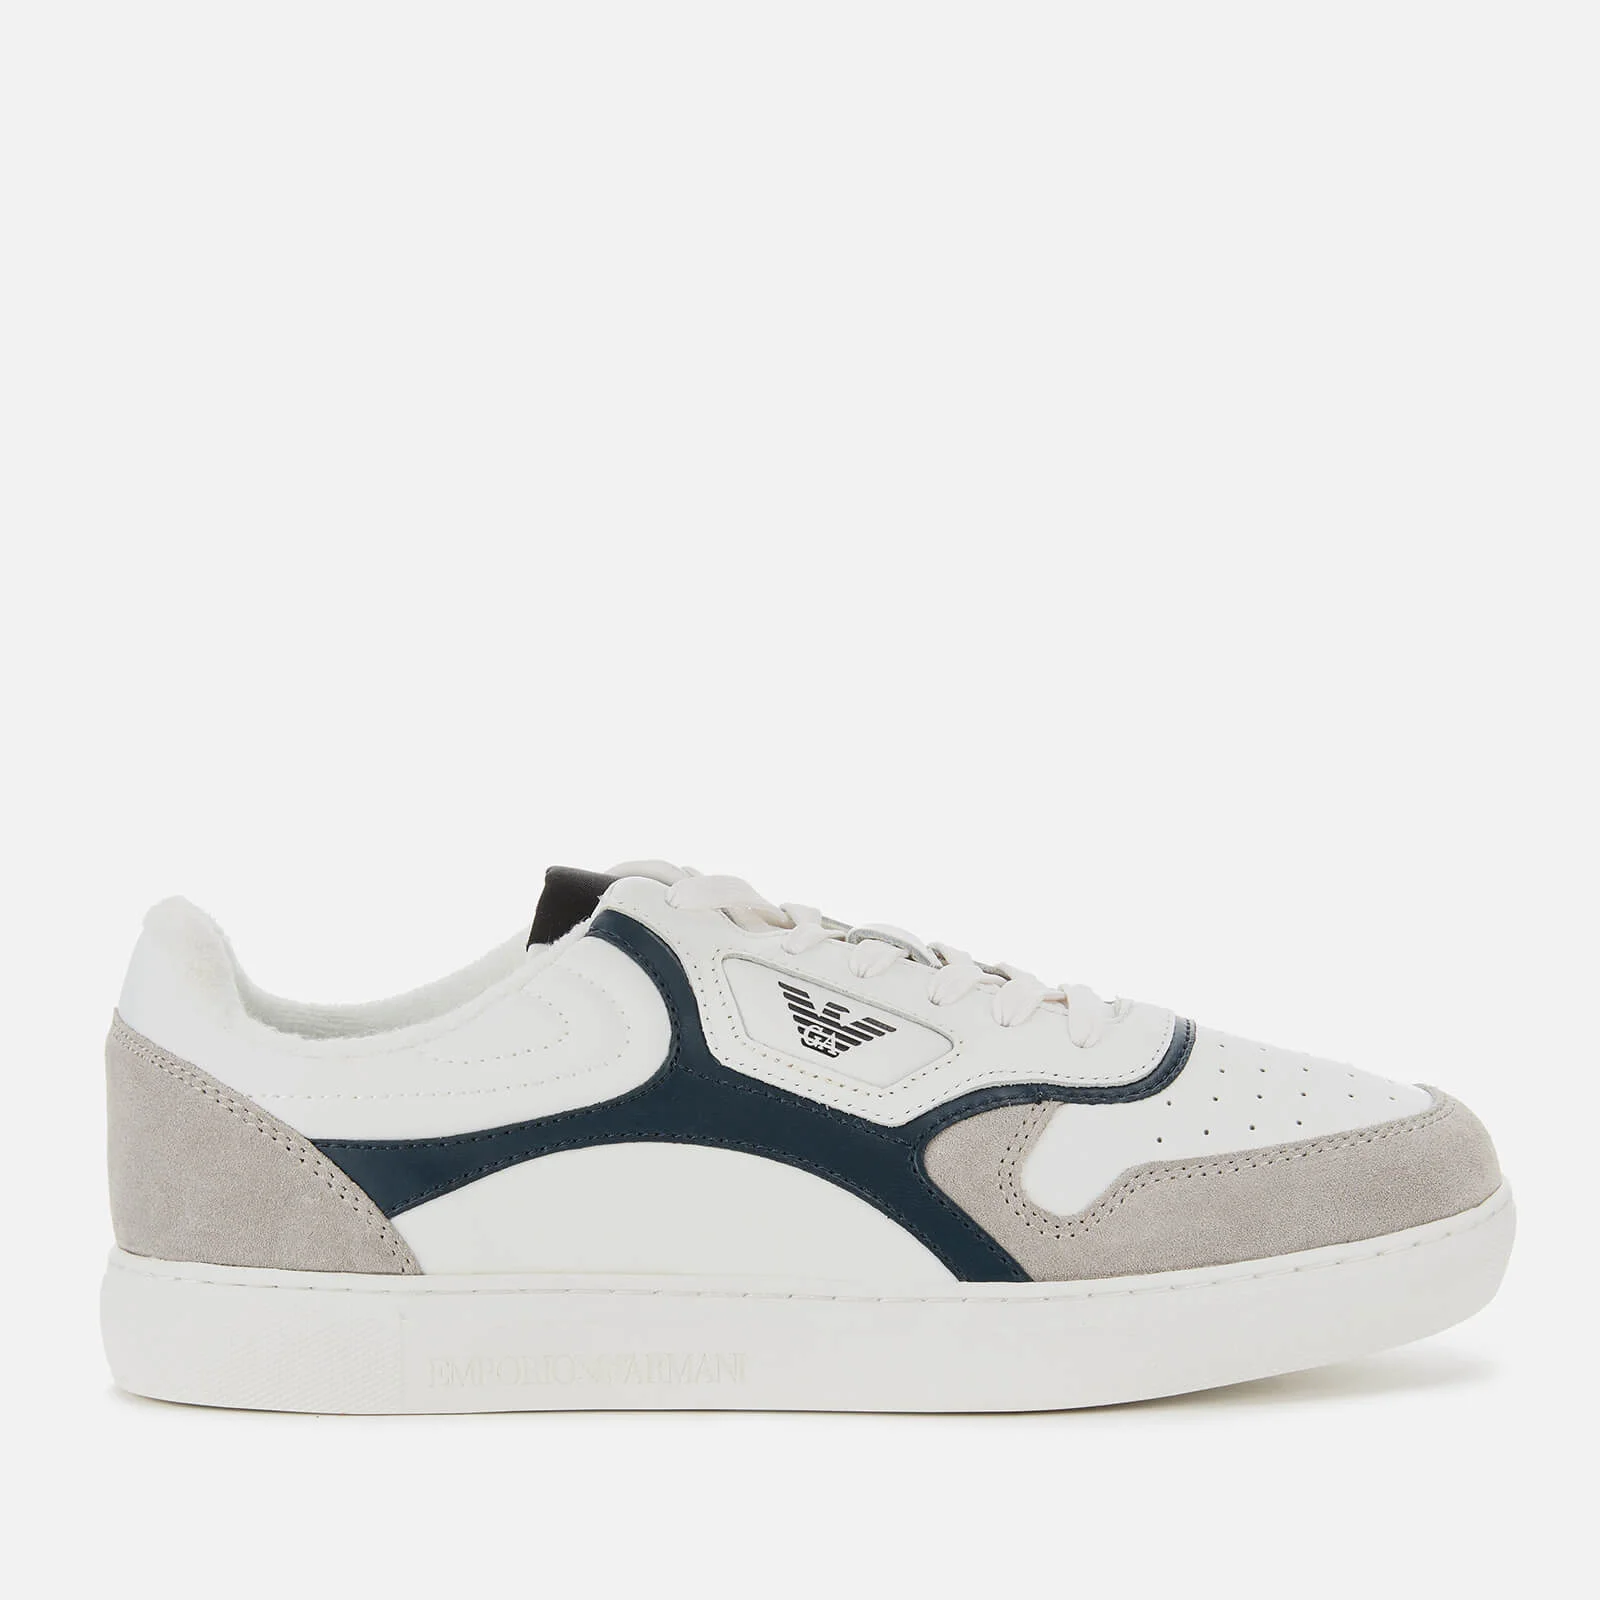 Emporio Armani Men's Suede/Mesh Running Style Trainers - Plaster/White/Midnight Image 1